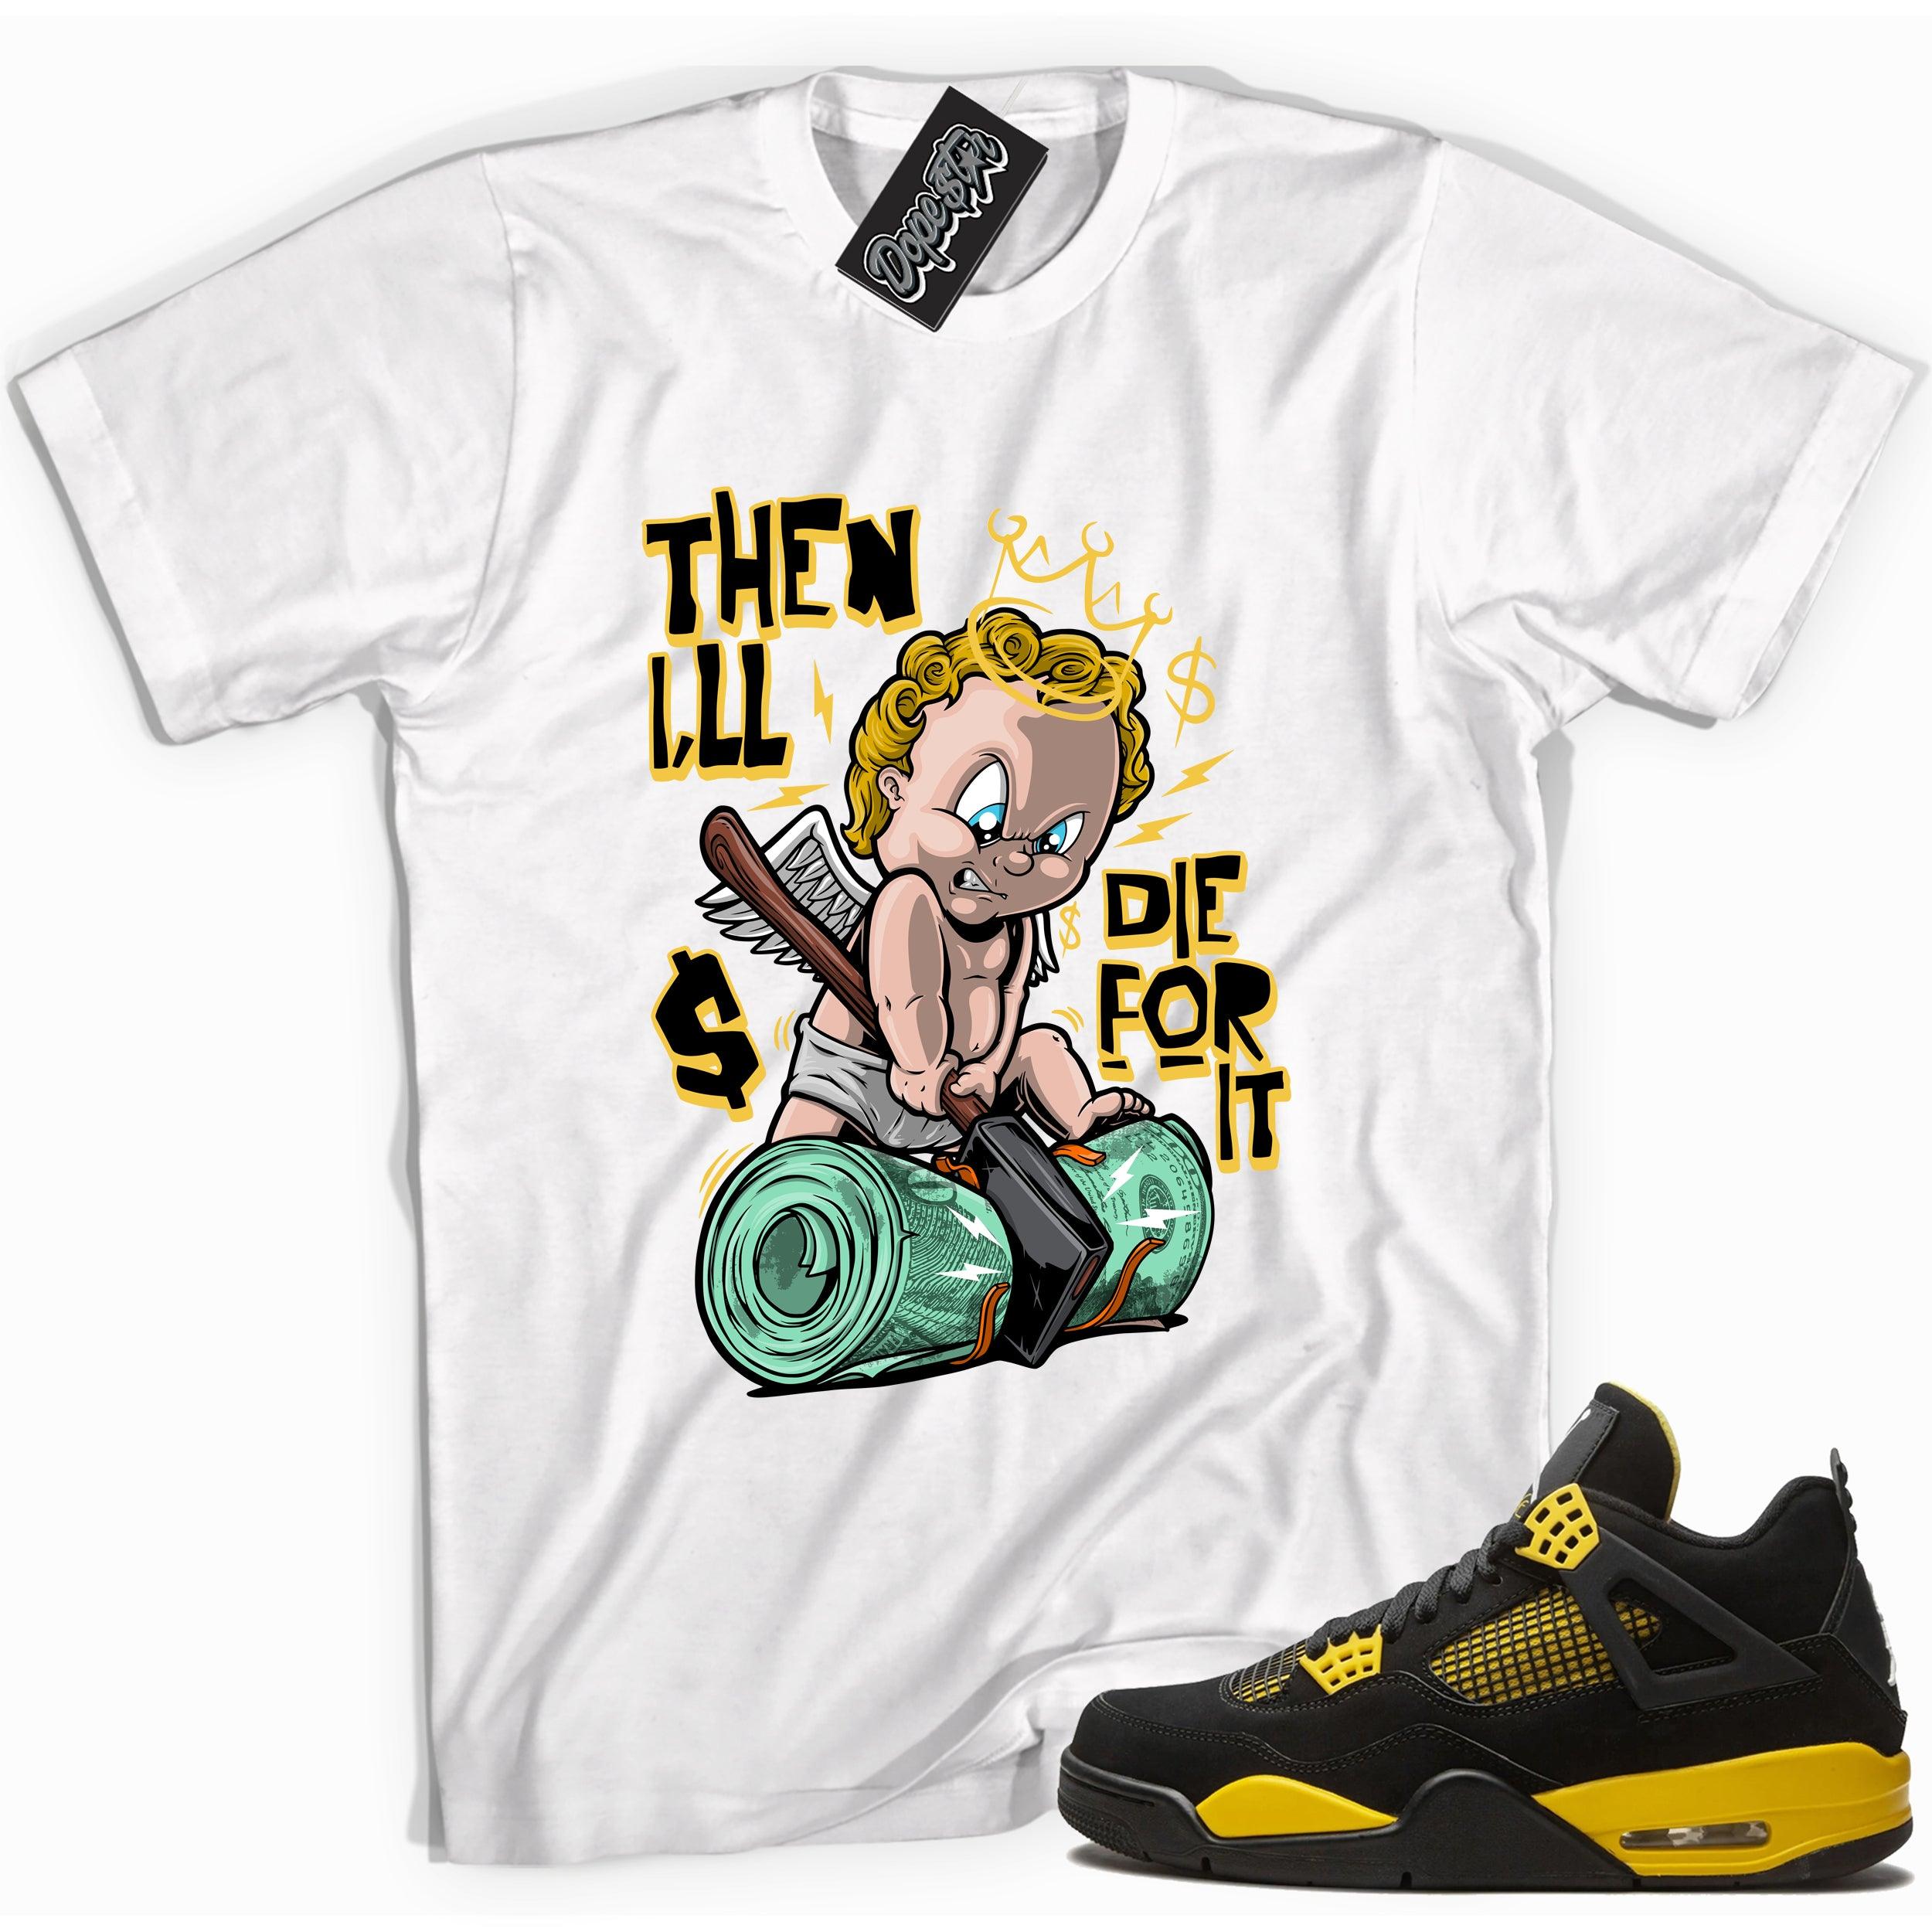 Cool white graphic tee with 'I’ll die for it' print, that perfectly matches Air Jordan 4 Thunder sneakers